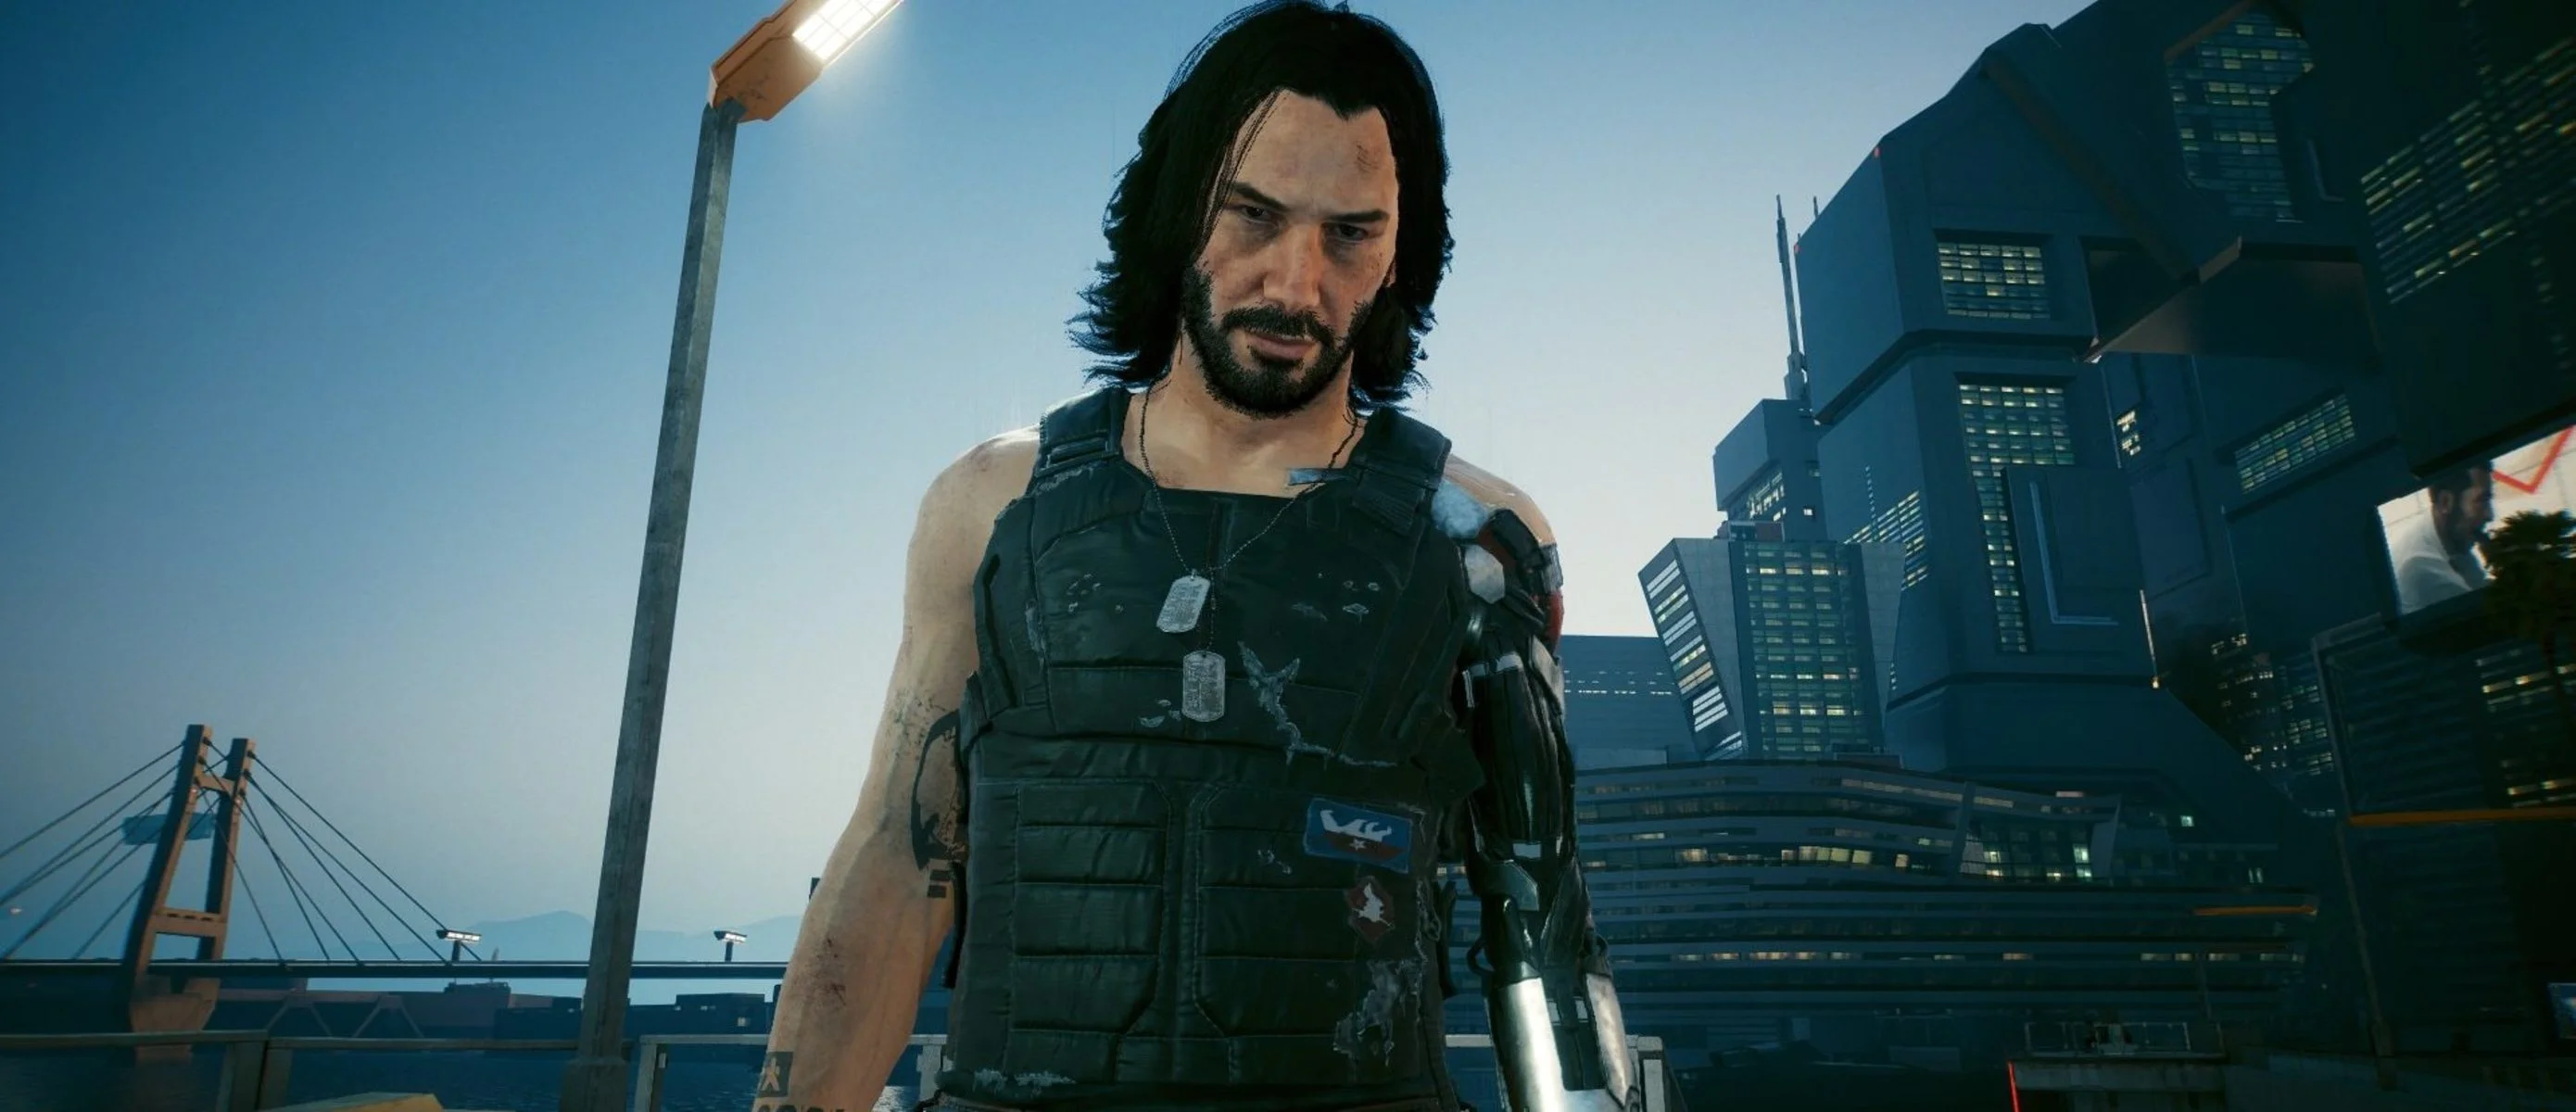 Players did not find all Easter eggs and references in Cyberpunk 2077